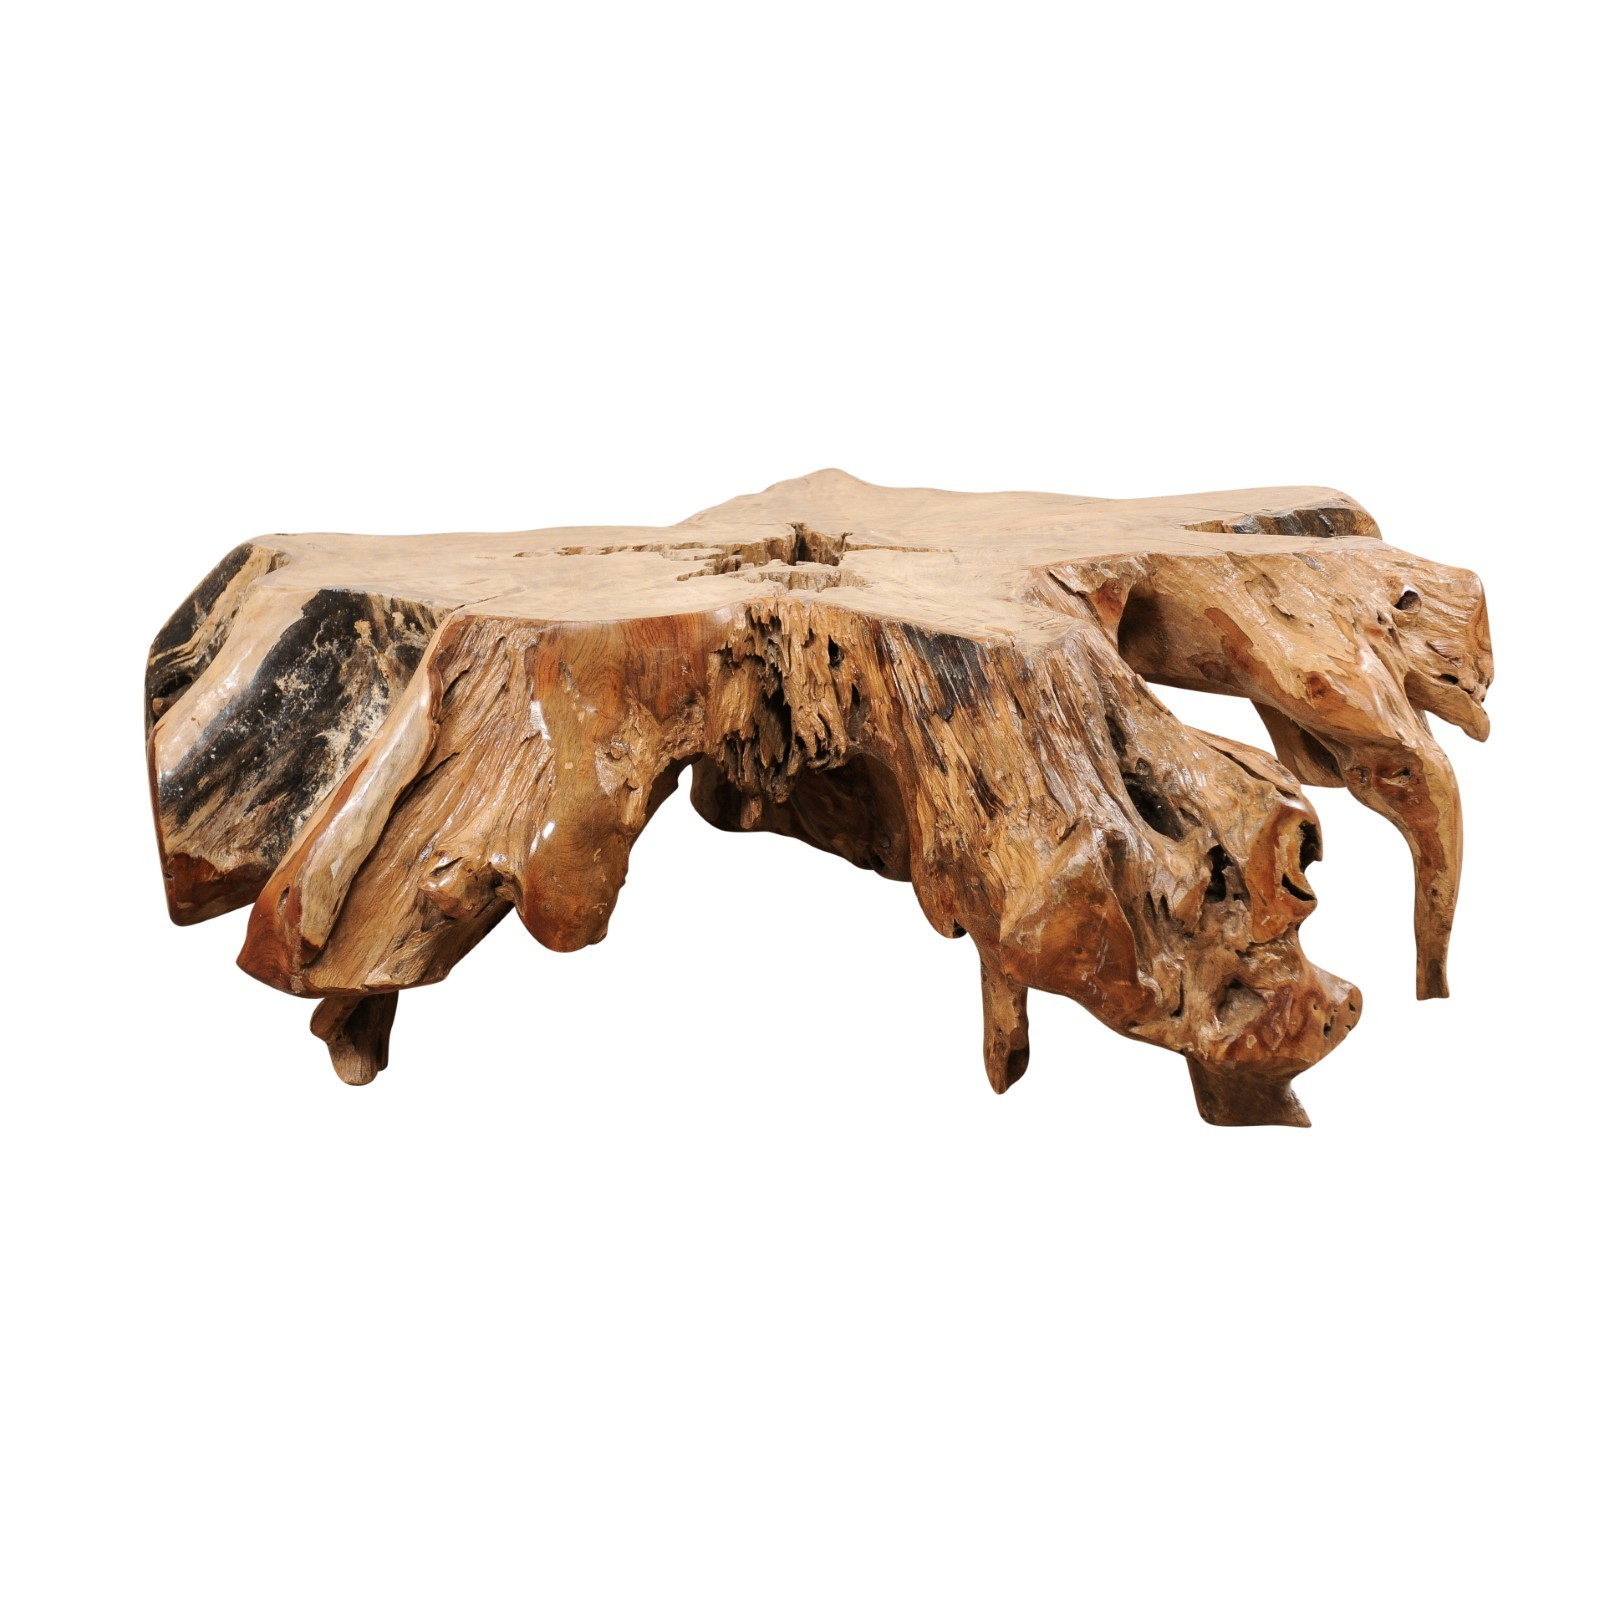 Teak Root Coffee Table 1220 A Tyner Antiques throughout dimensions 1600 X 1600